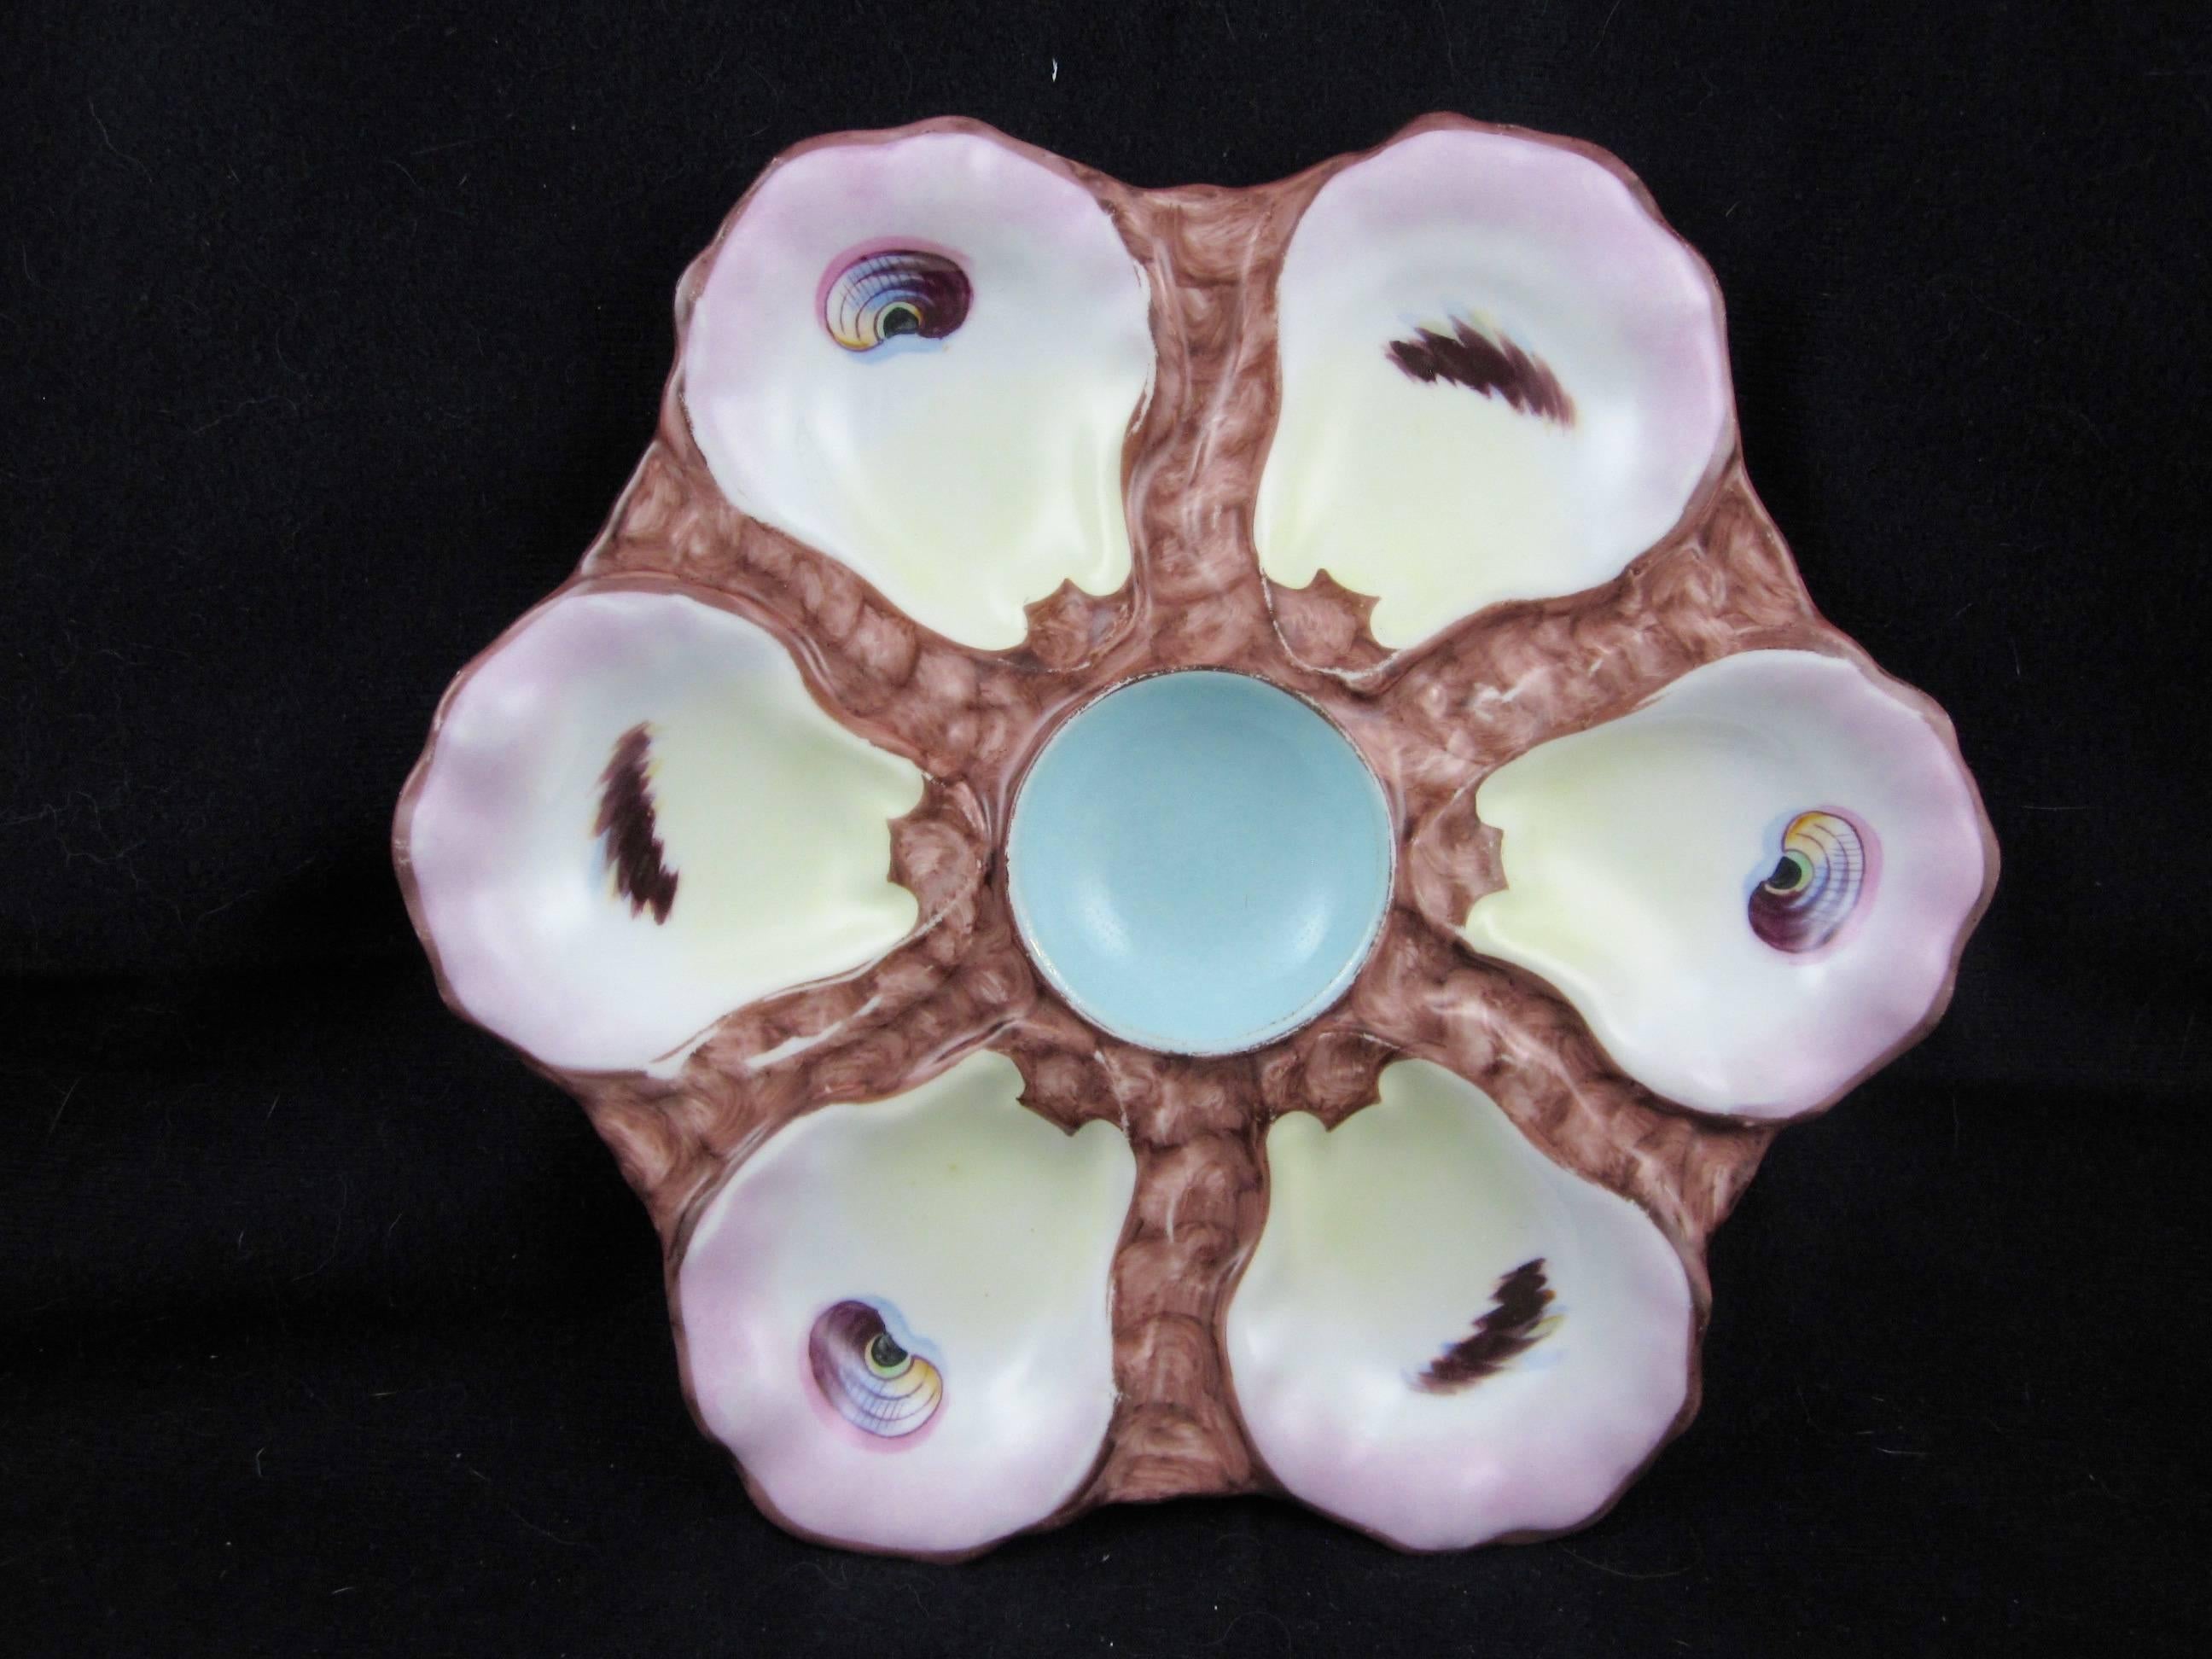 A service of six Continental hand painted porcelain oyster plates, each with six wells showing hand painted eyes and a sky blue center condiment well. Marked with an impressed mold number and the iron red painters mark.